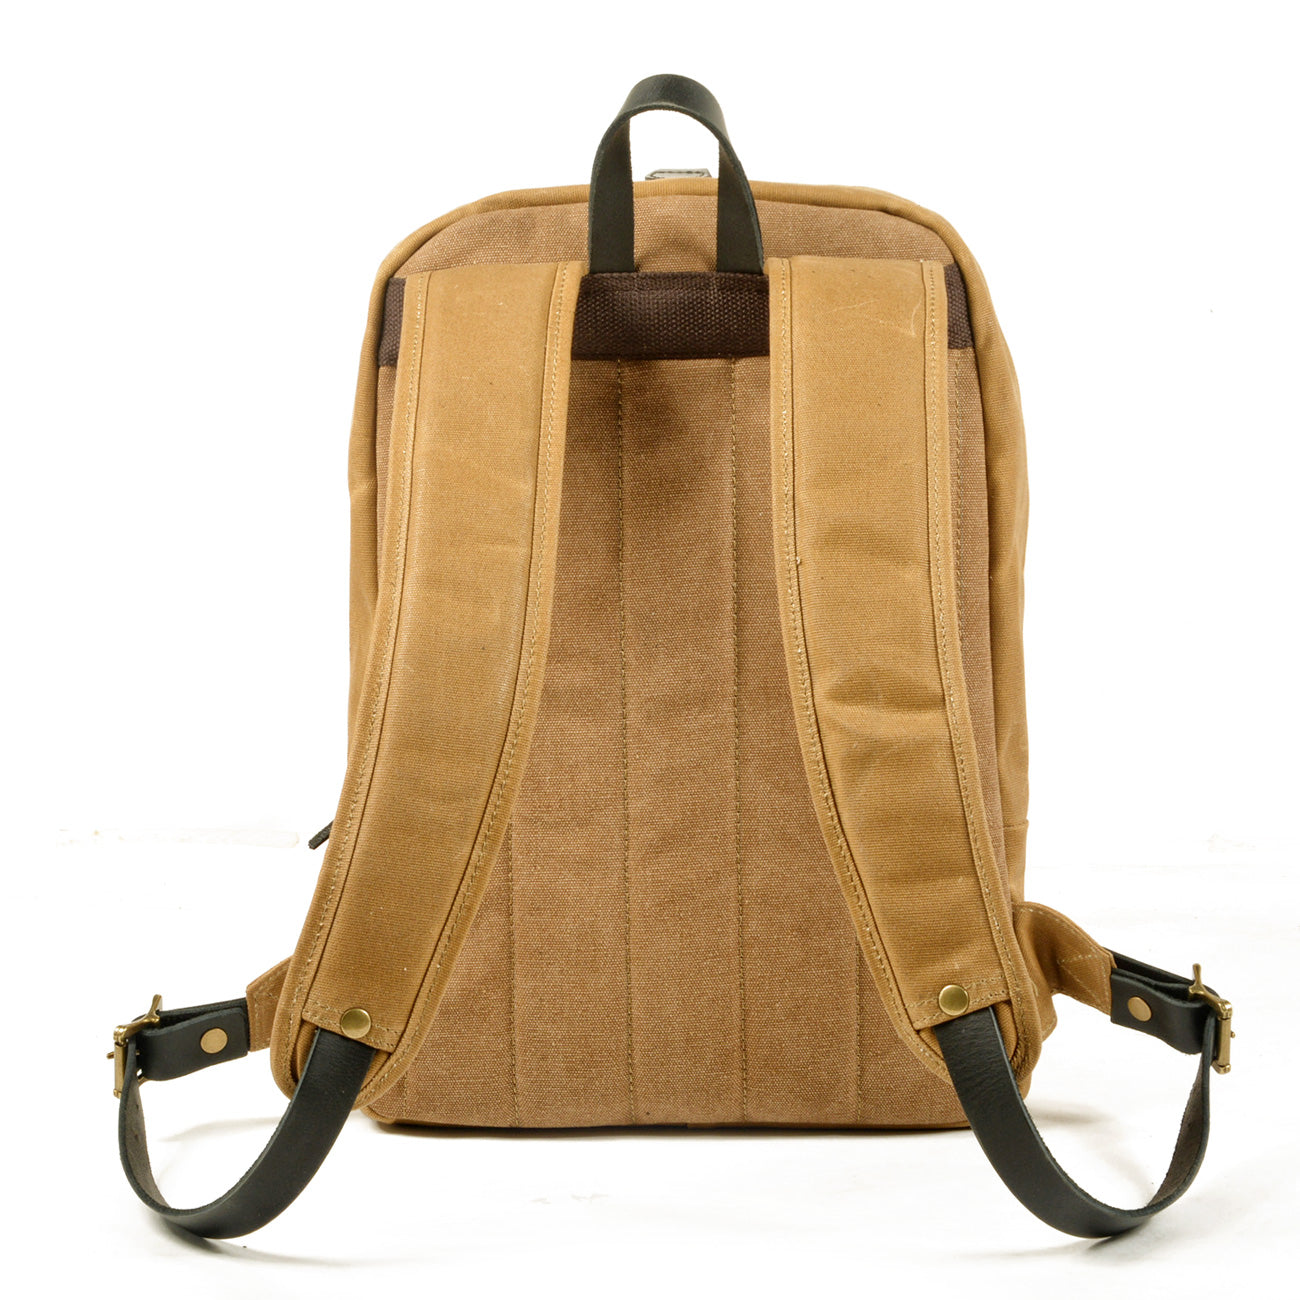 Waxed Vintage Canvas School Backpack 18L